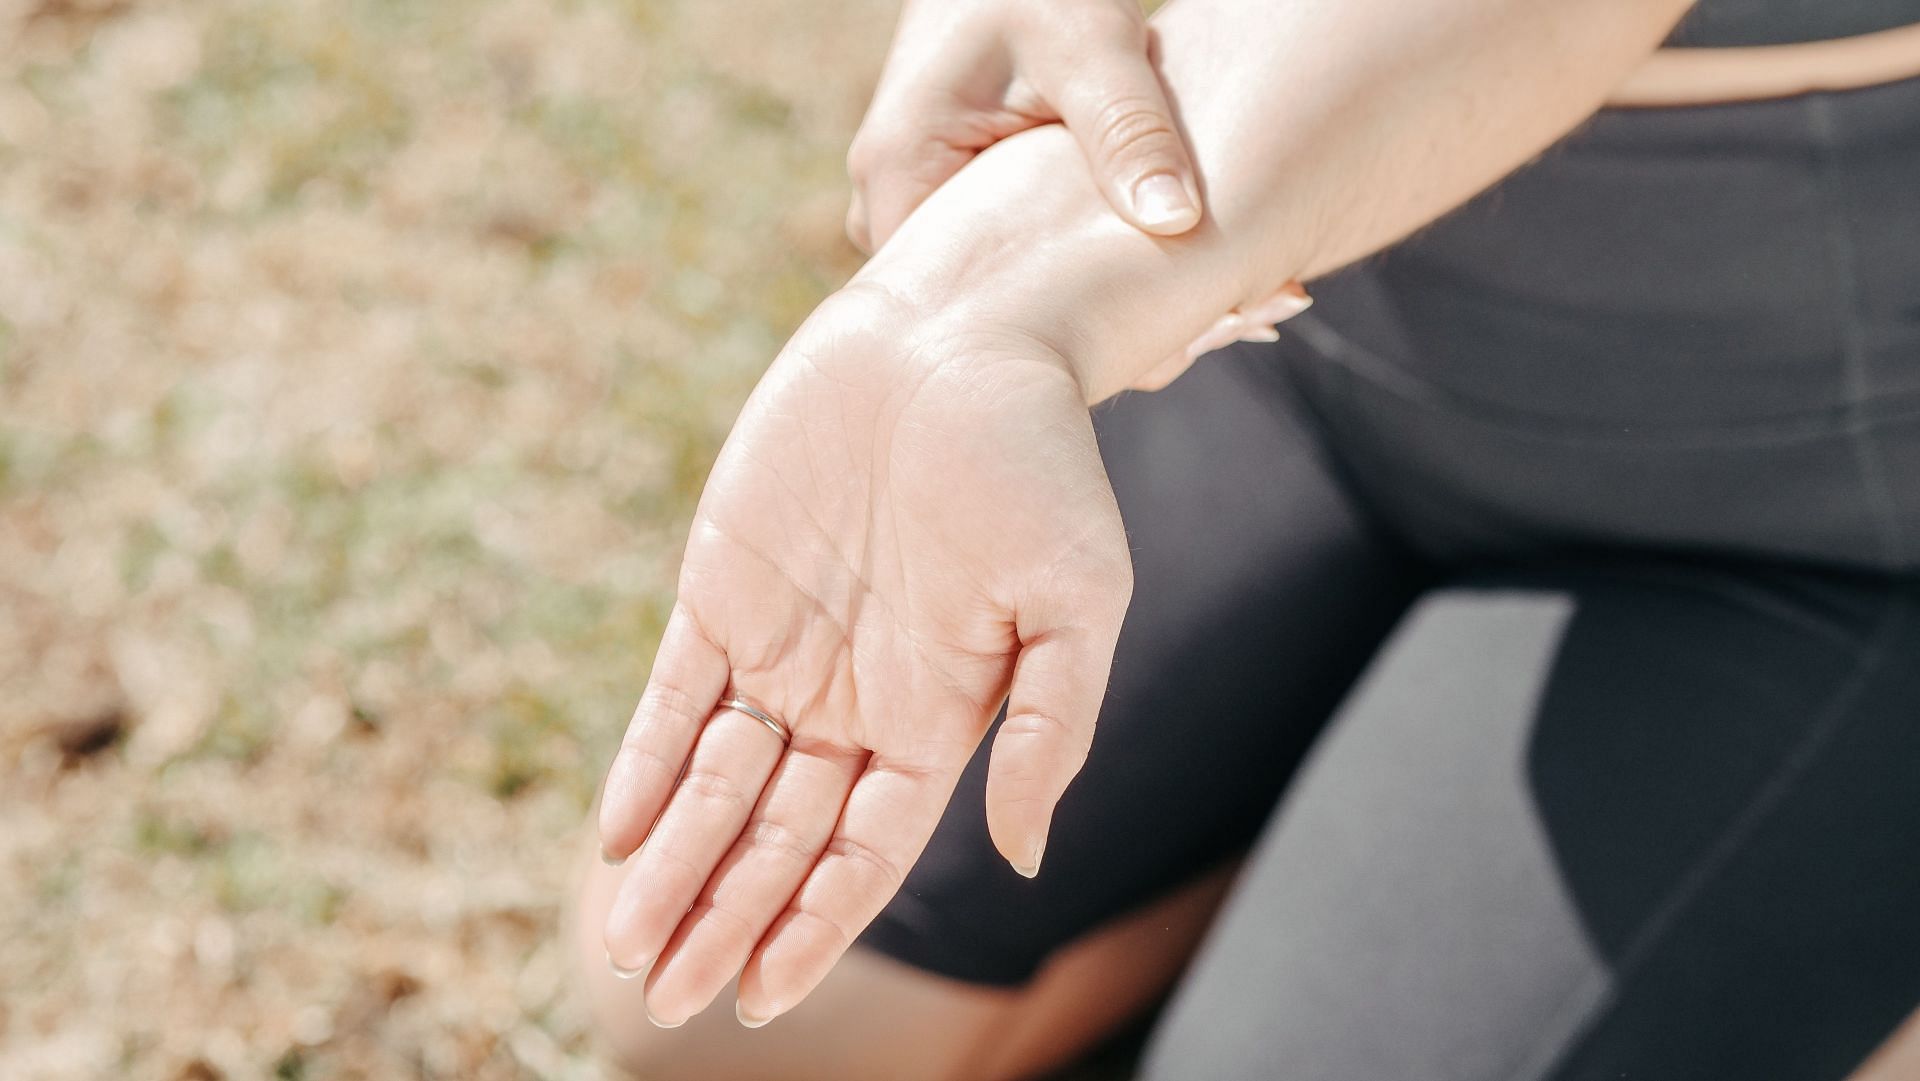  Wrist Strengthening Exercises For Strong, Pain-Free Wrists (Image via Pexels)